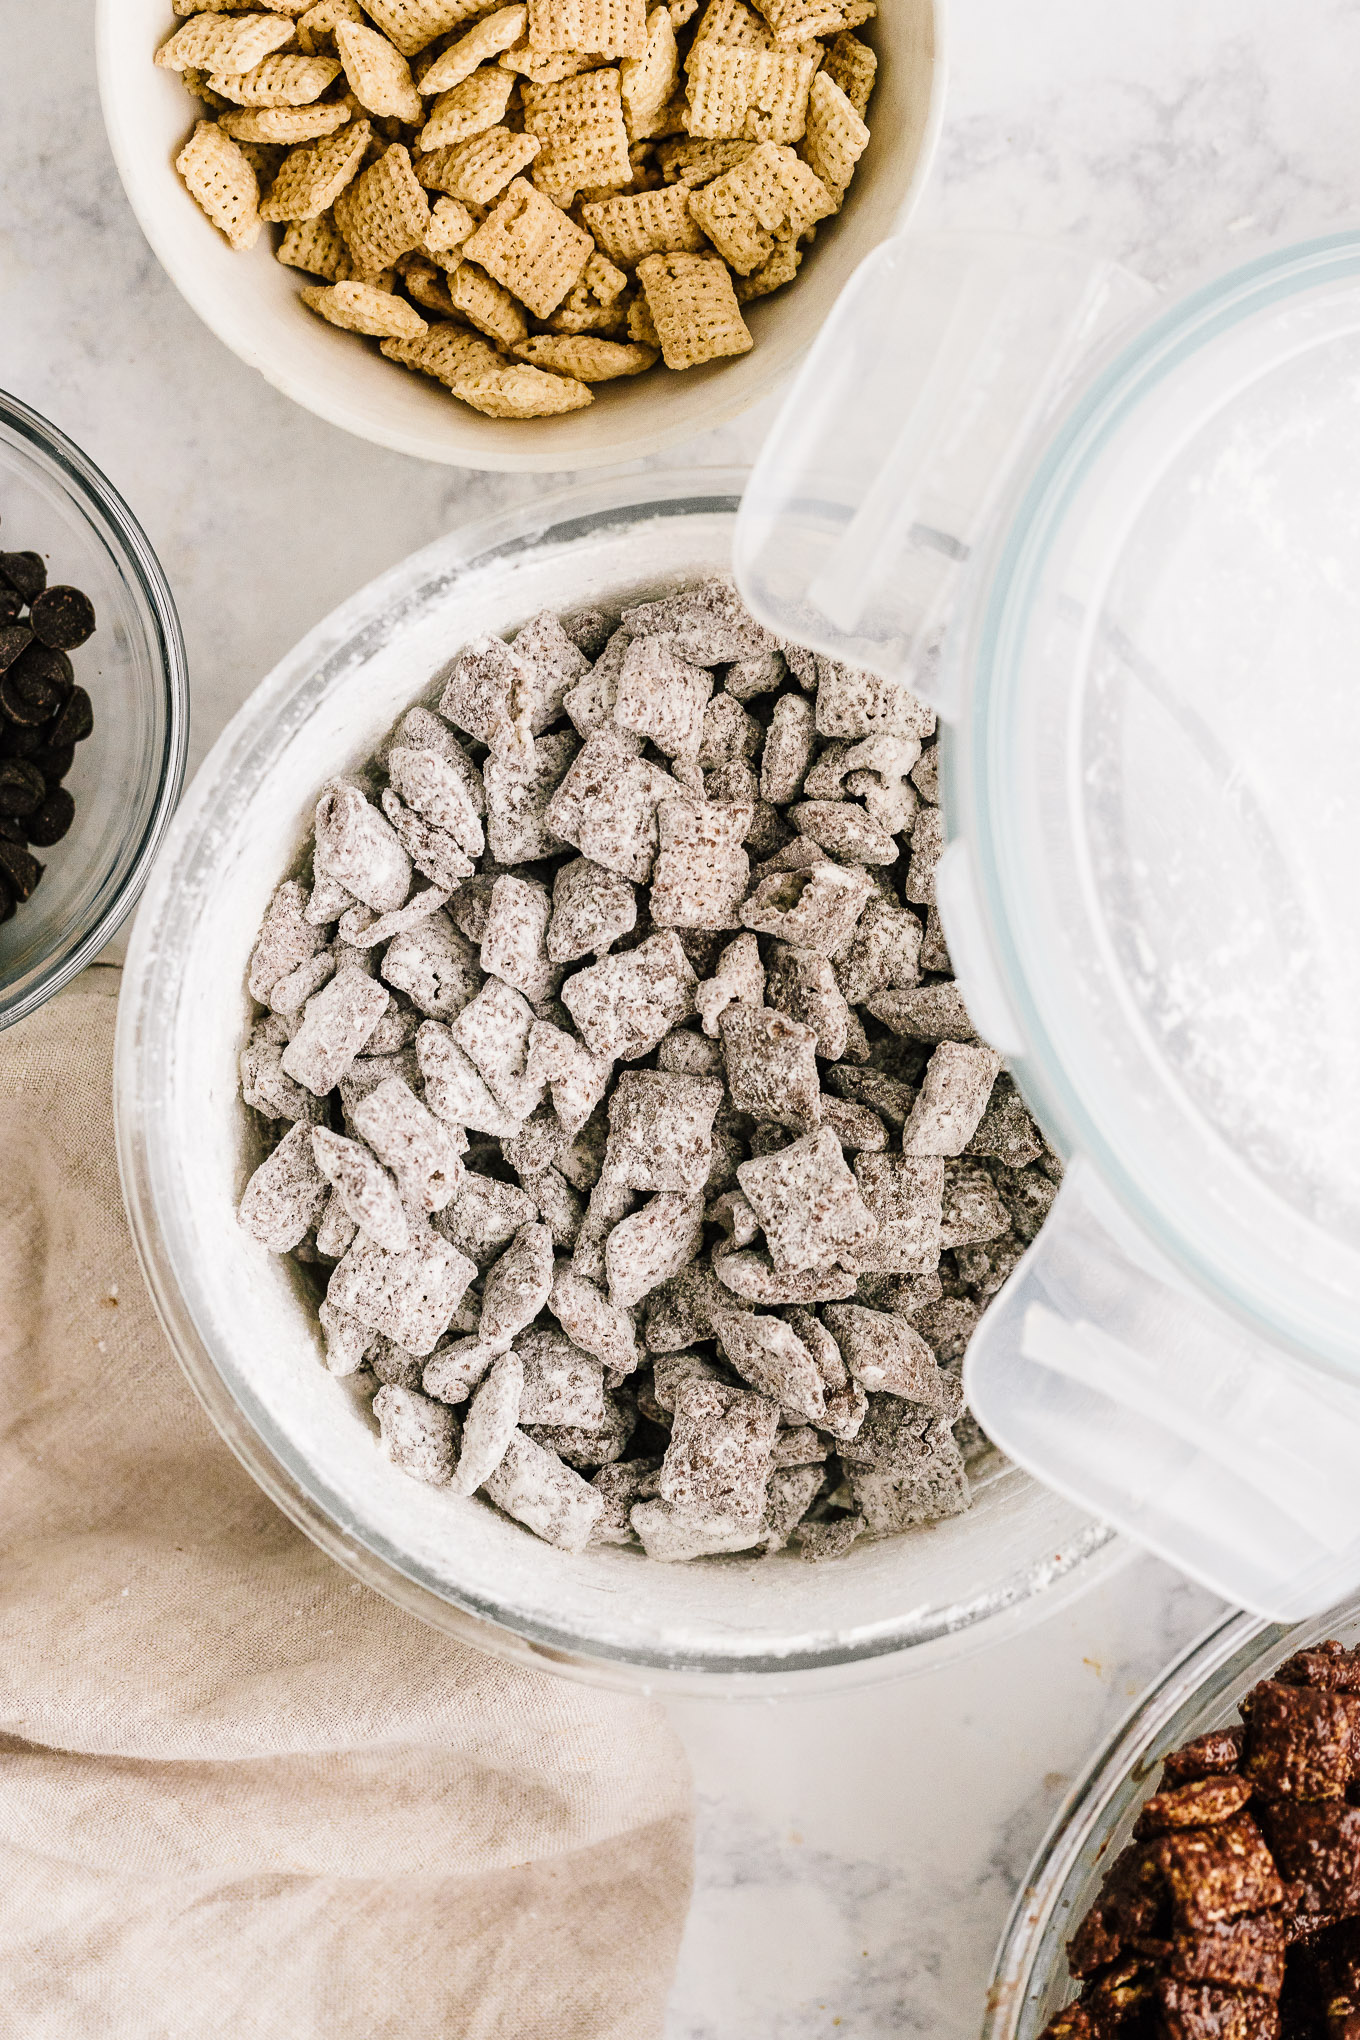 chocolate peanut butter covered chex cereal with powdered sugar (monk fruit)